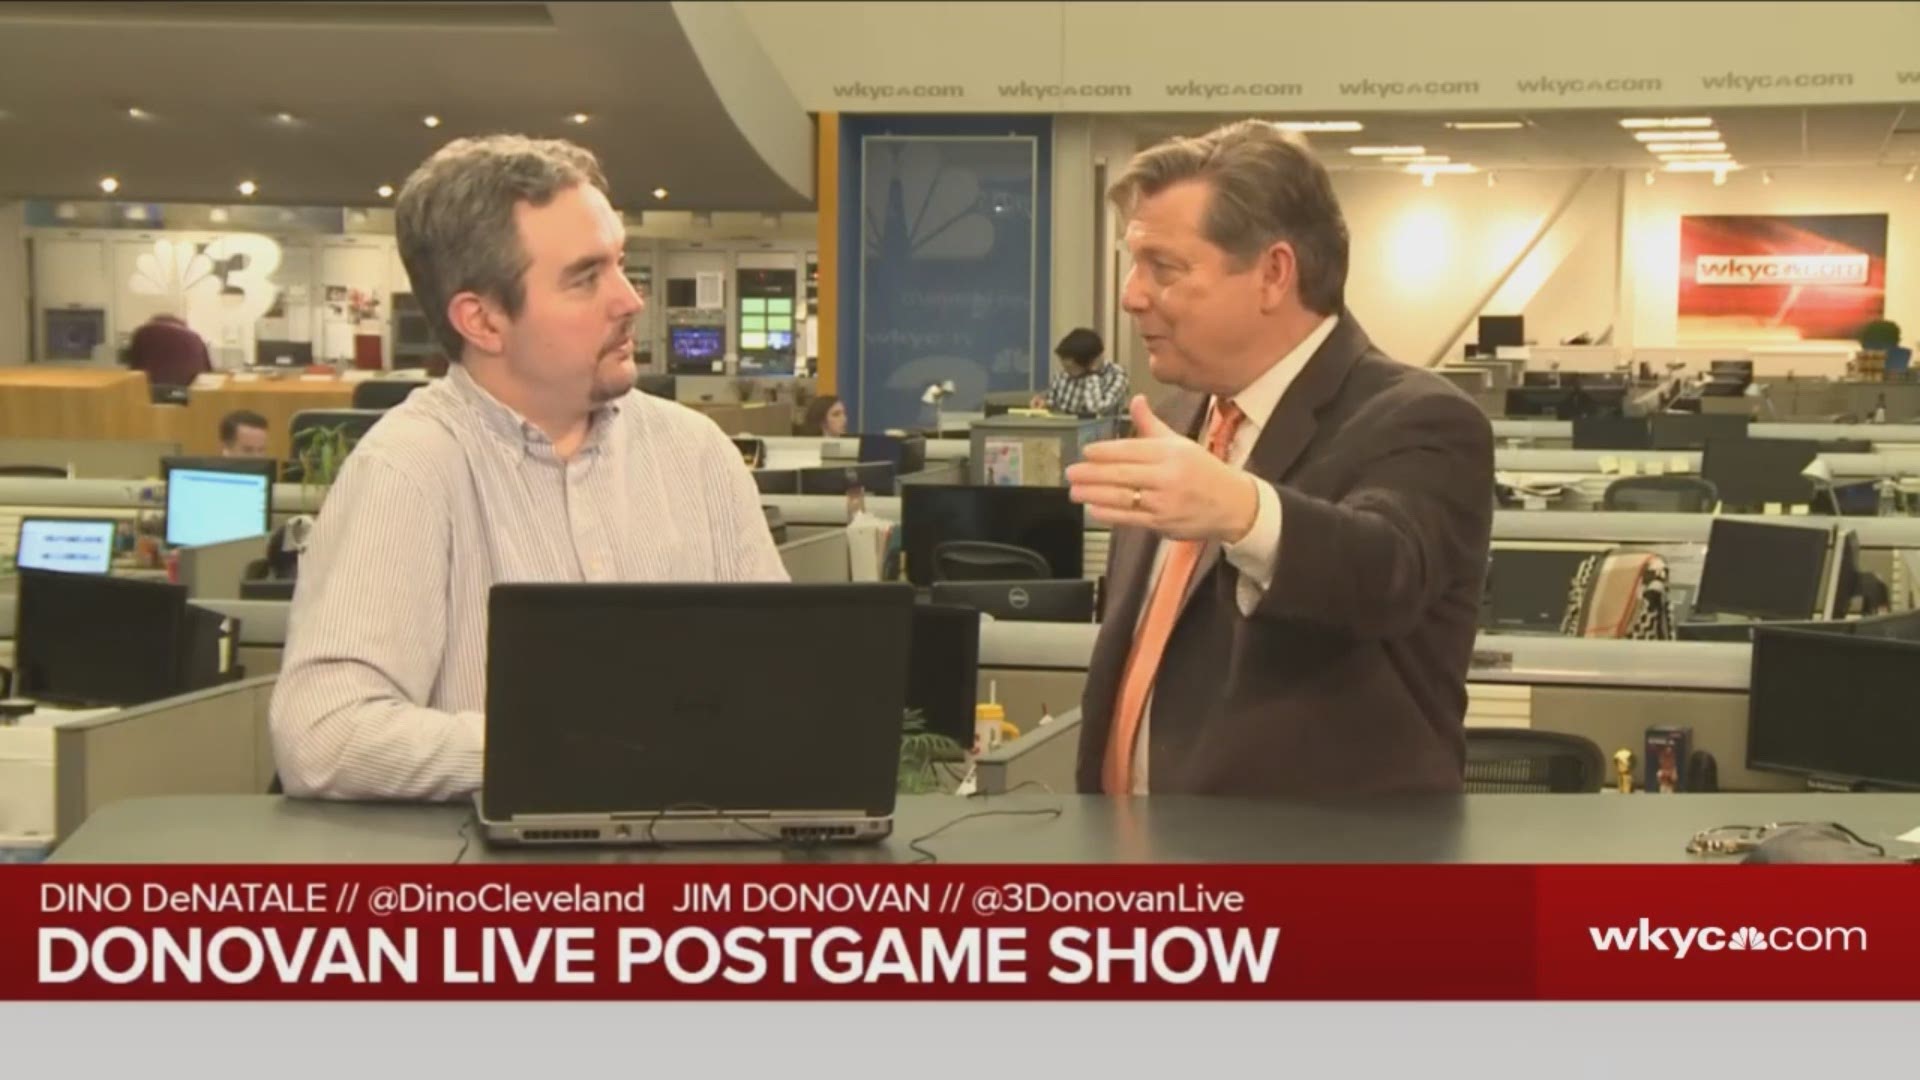 Are we as fans too harsh on referees? The Donovan Live Postgame Show